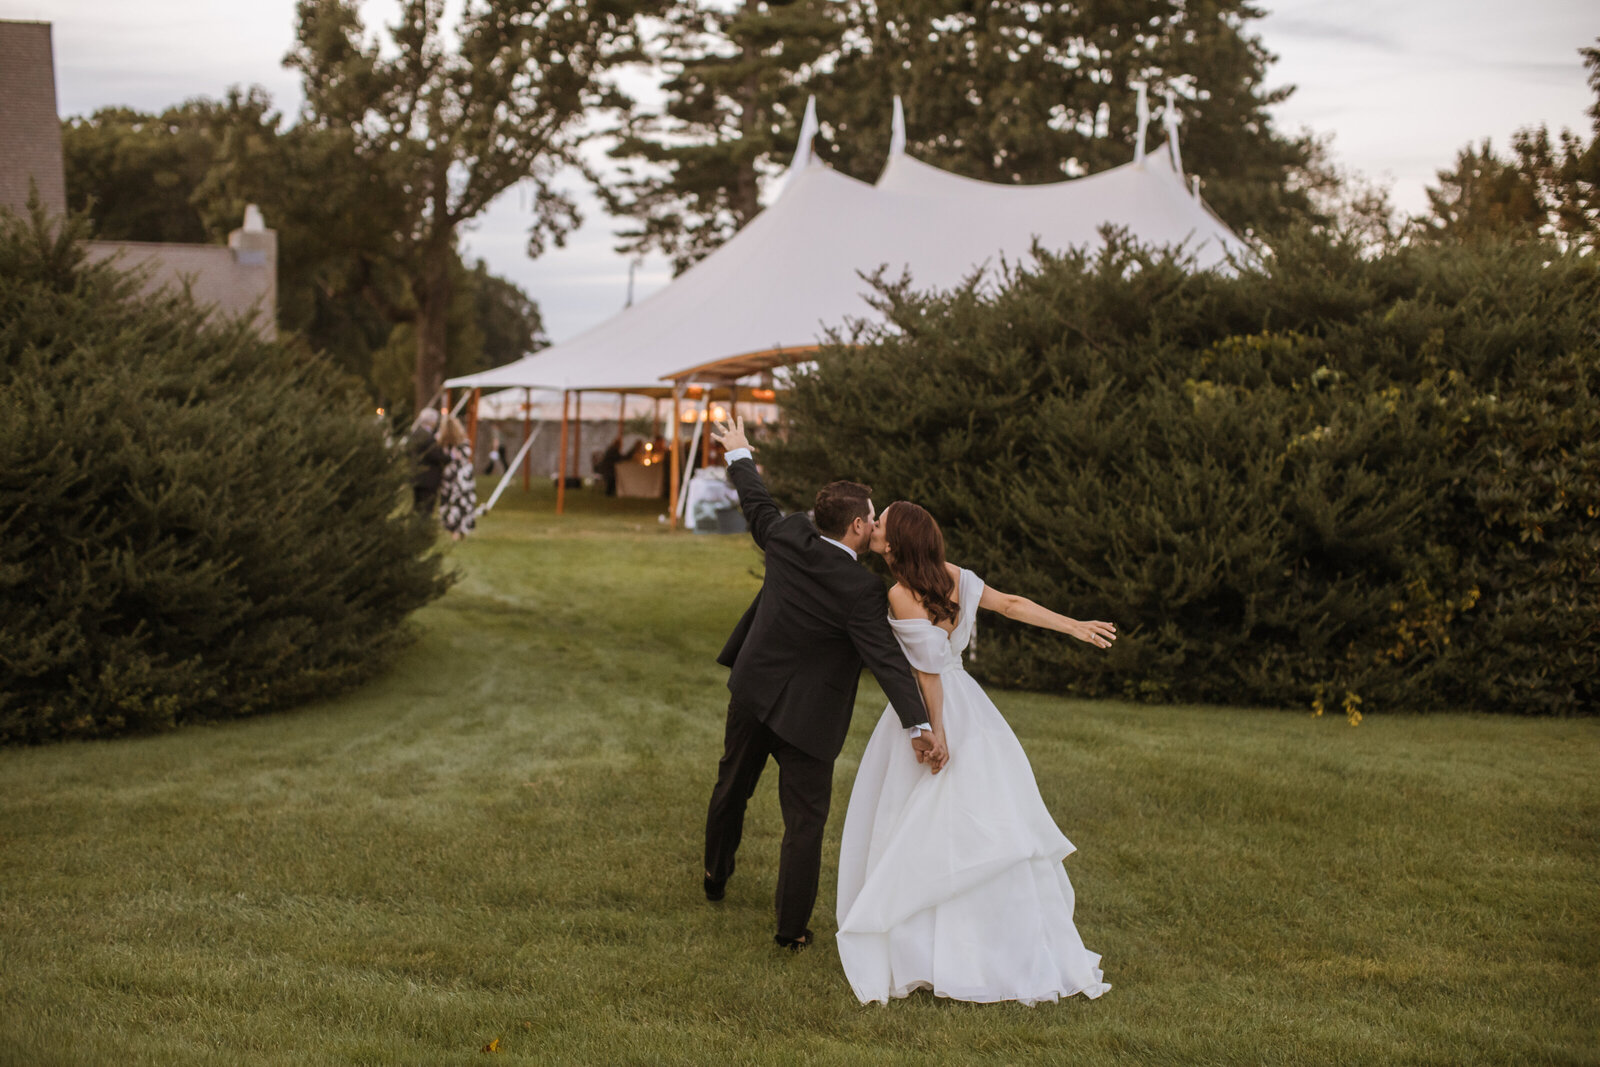 jubilee_events_tented_wedding_fall_99